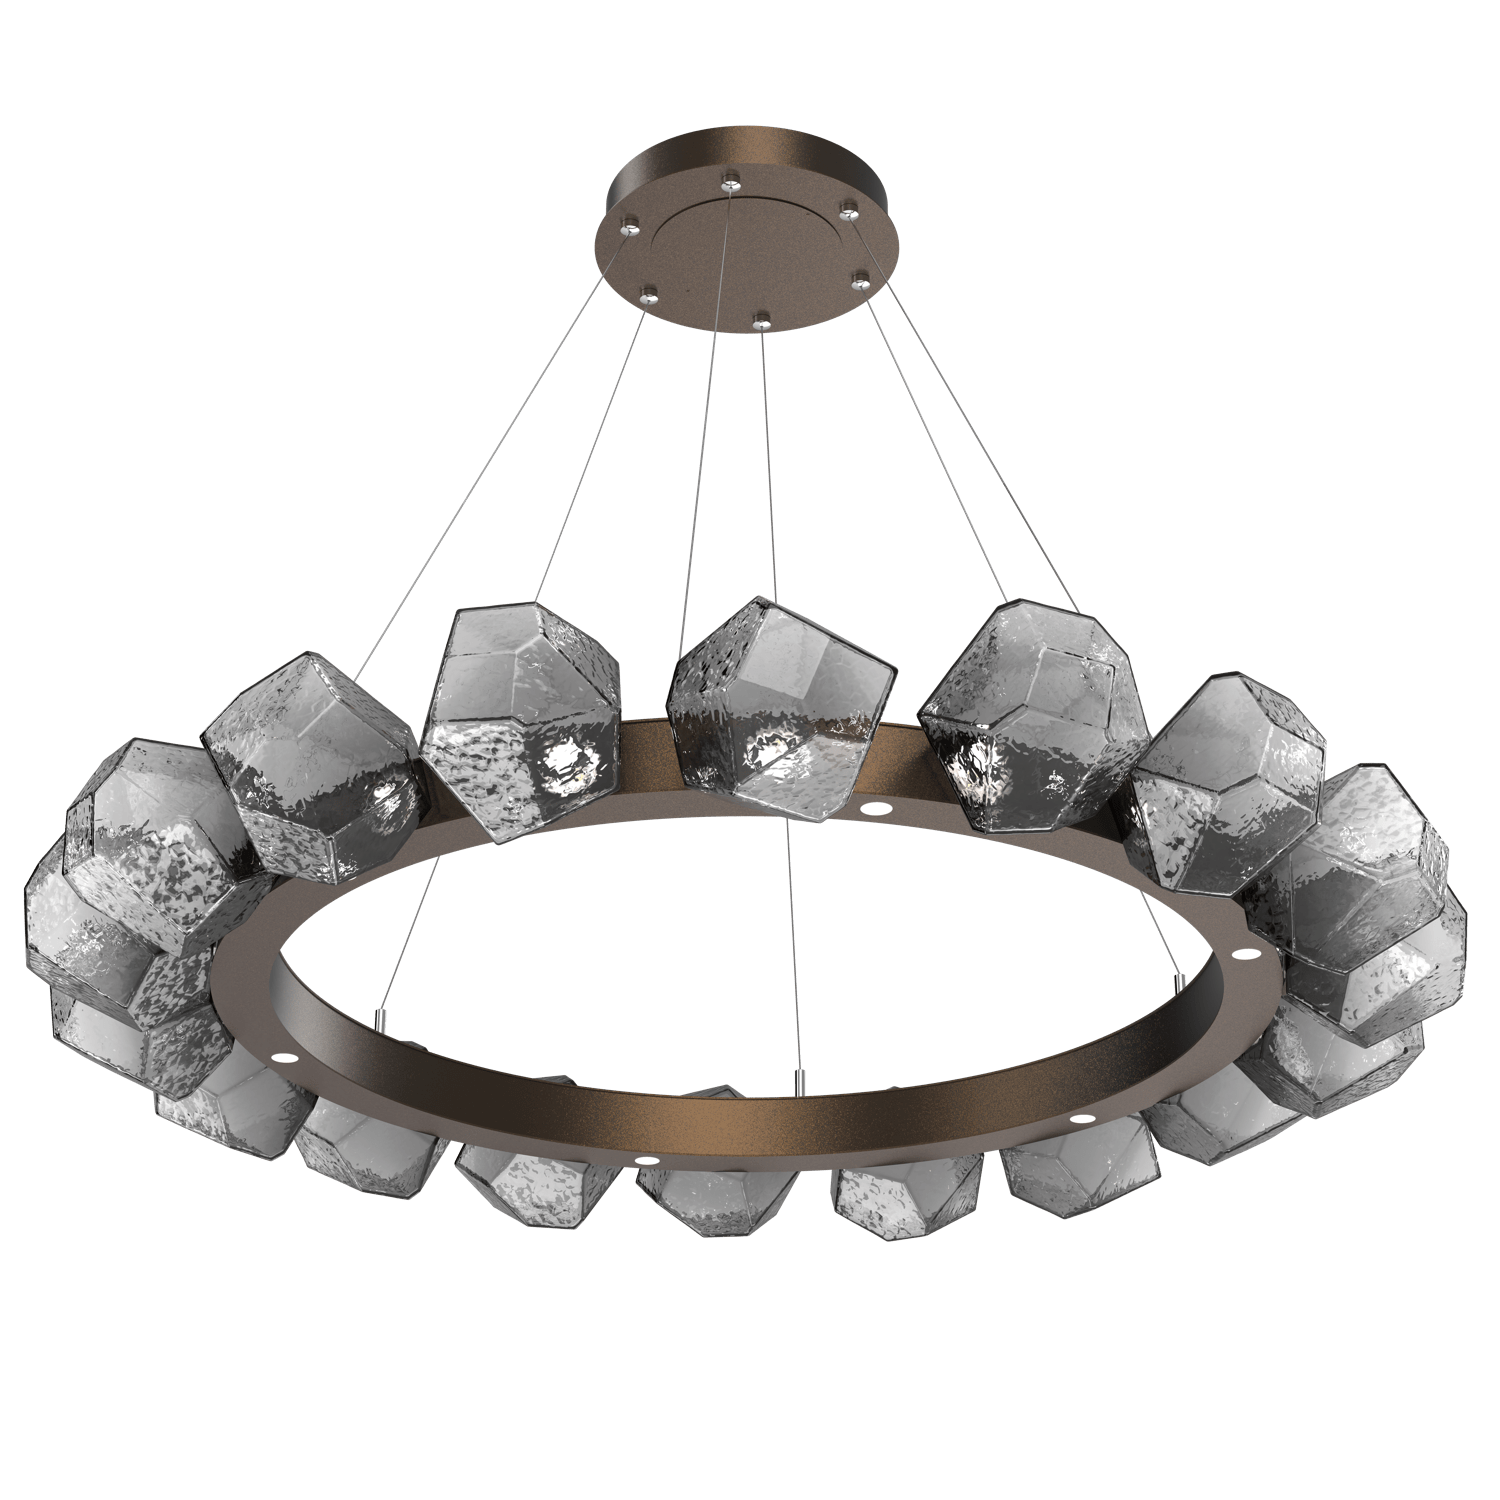 CHB0039-48-FB-S-Hammerton-Studio-Gem-48-inch-radial-ring-chandelier-with-flat-bronze-finish-and-smoke-blown-glass-shades-and-LED-lamping